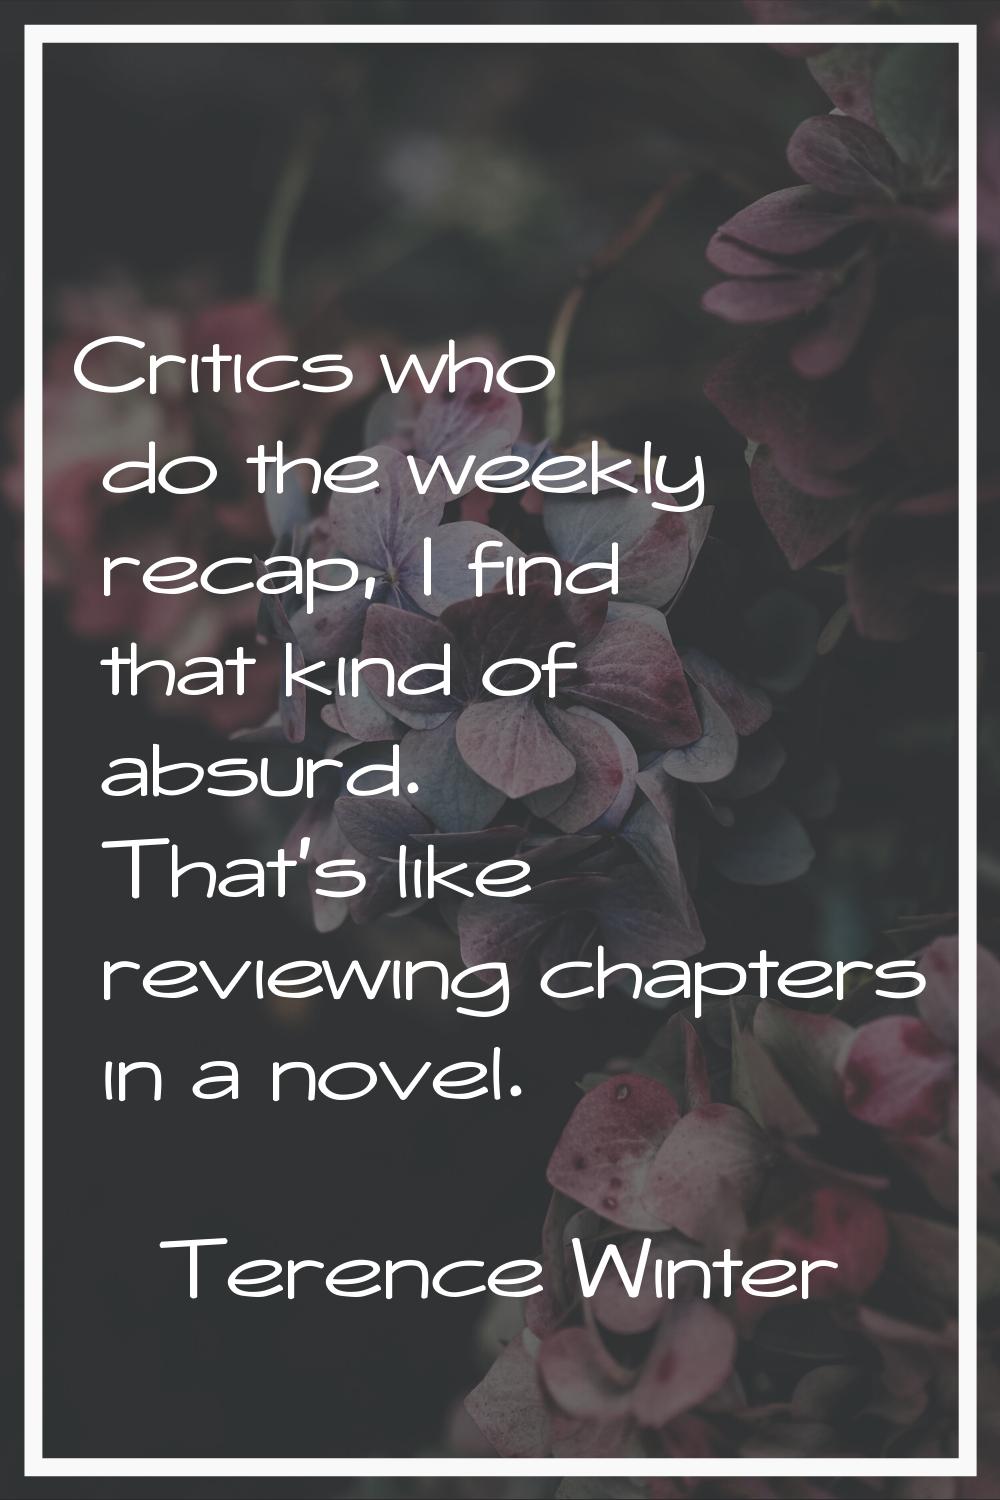 Critics who do the weekly recap, I find that kind of absurd. That's like reviewing chapters in a no